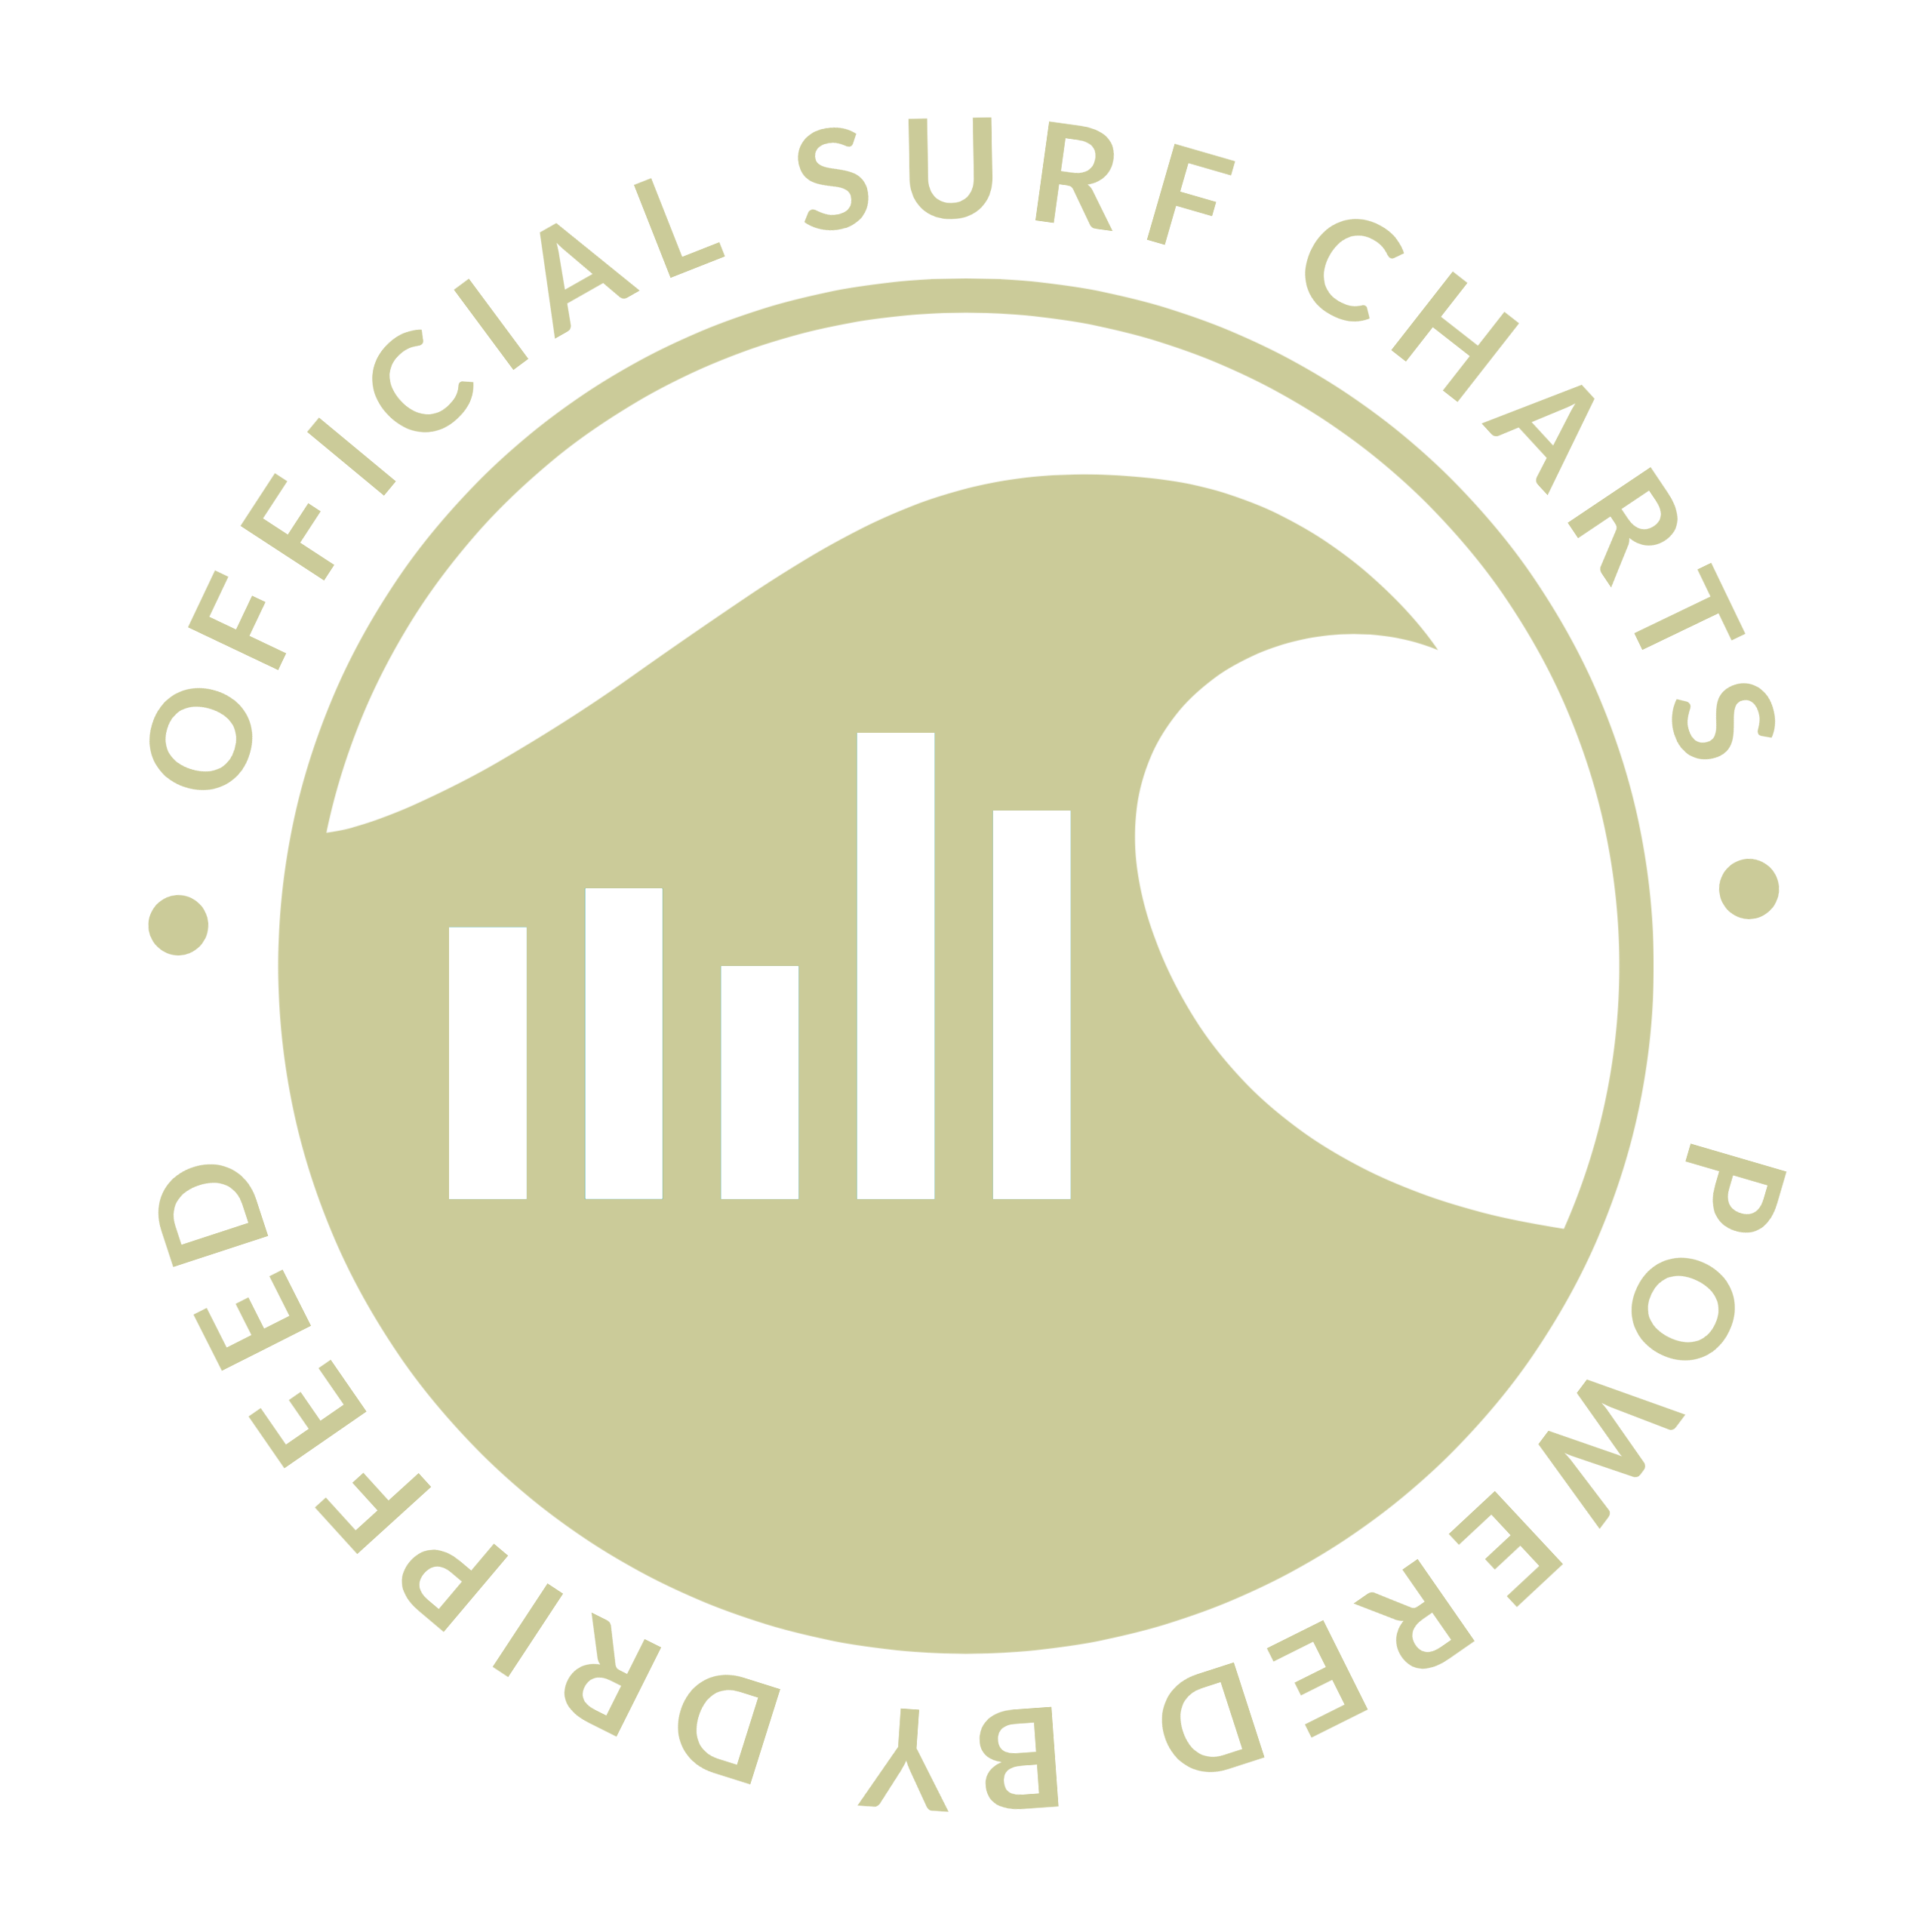 OfficialSurfCharts-logo1 The Official Surf Charts - DripFeed.net